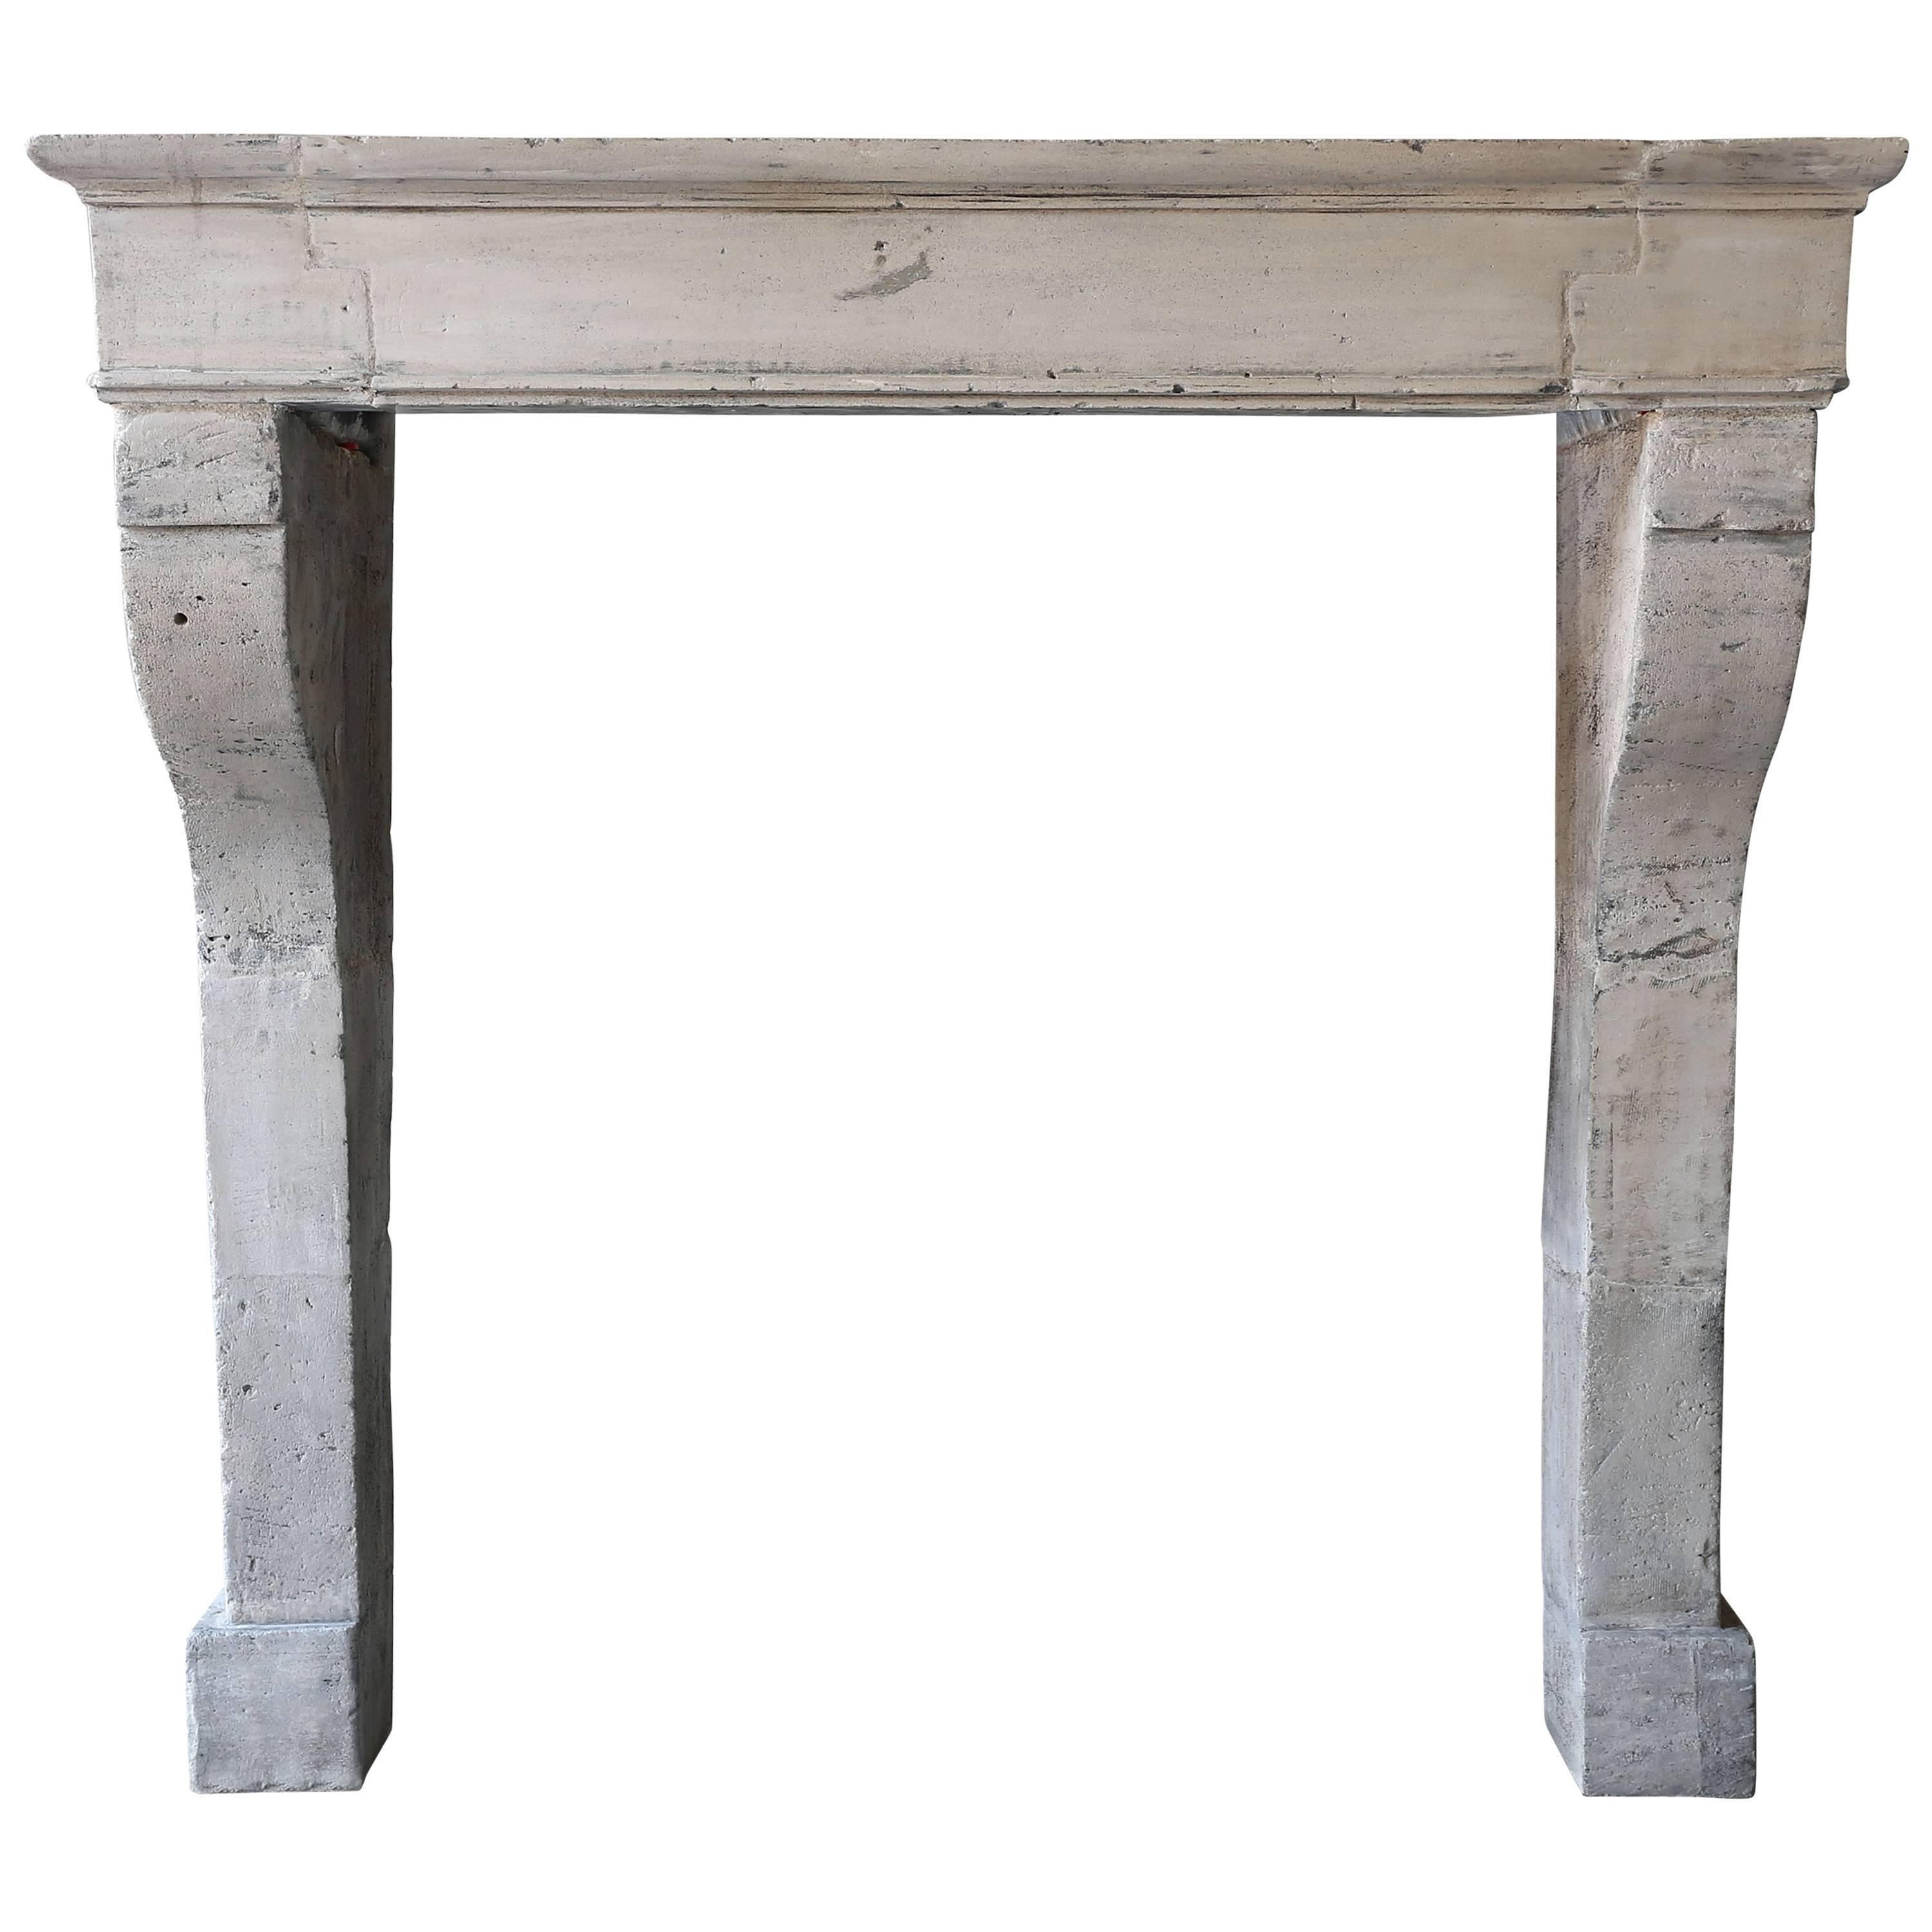 New Arrival, Antique Fireplace of French Limestone from the 19th Century, 903